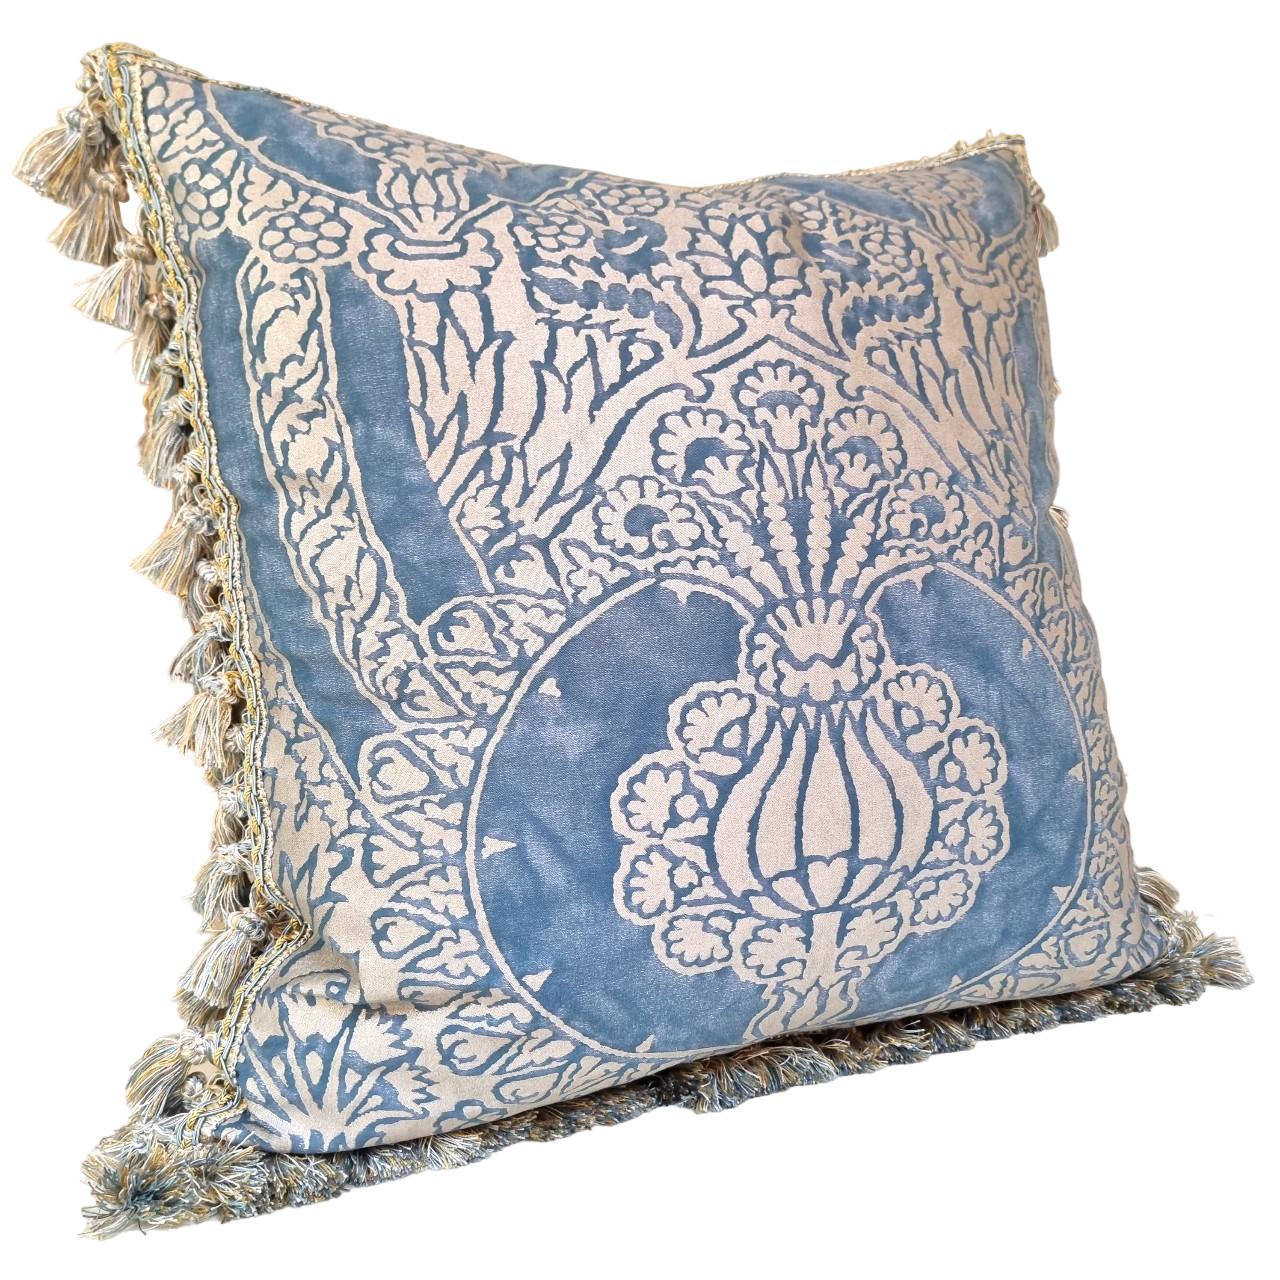 Double Sided Fortuny Fabric Pillow Tassel Trim Blue Silvery Gold Nicolo Pattern In New Condition For Sale In Venezia, IT